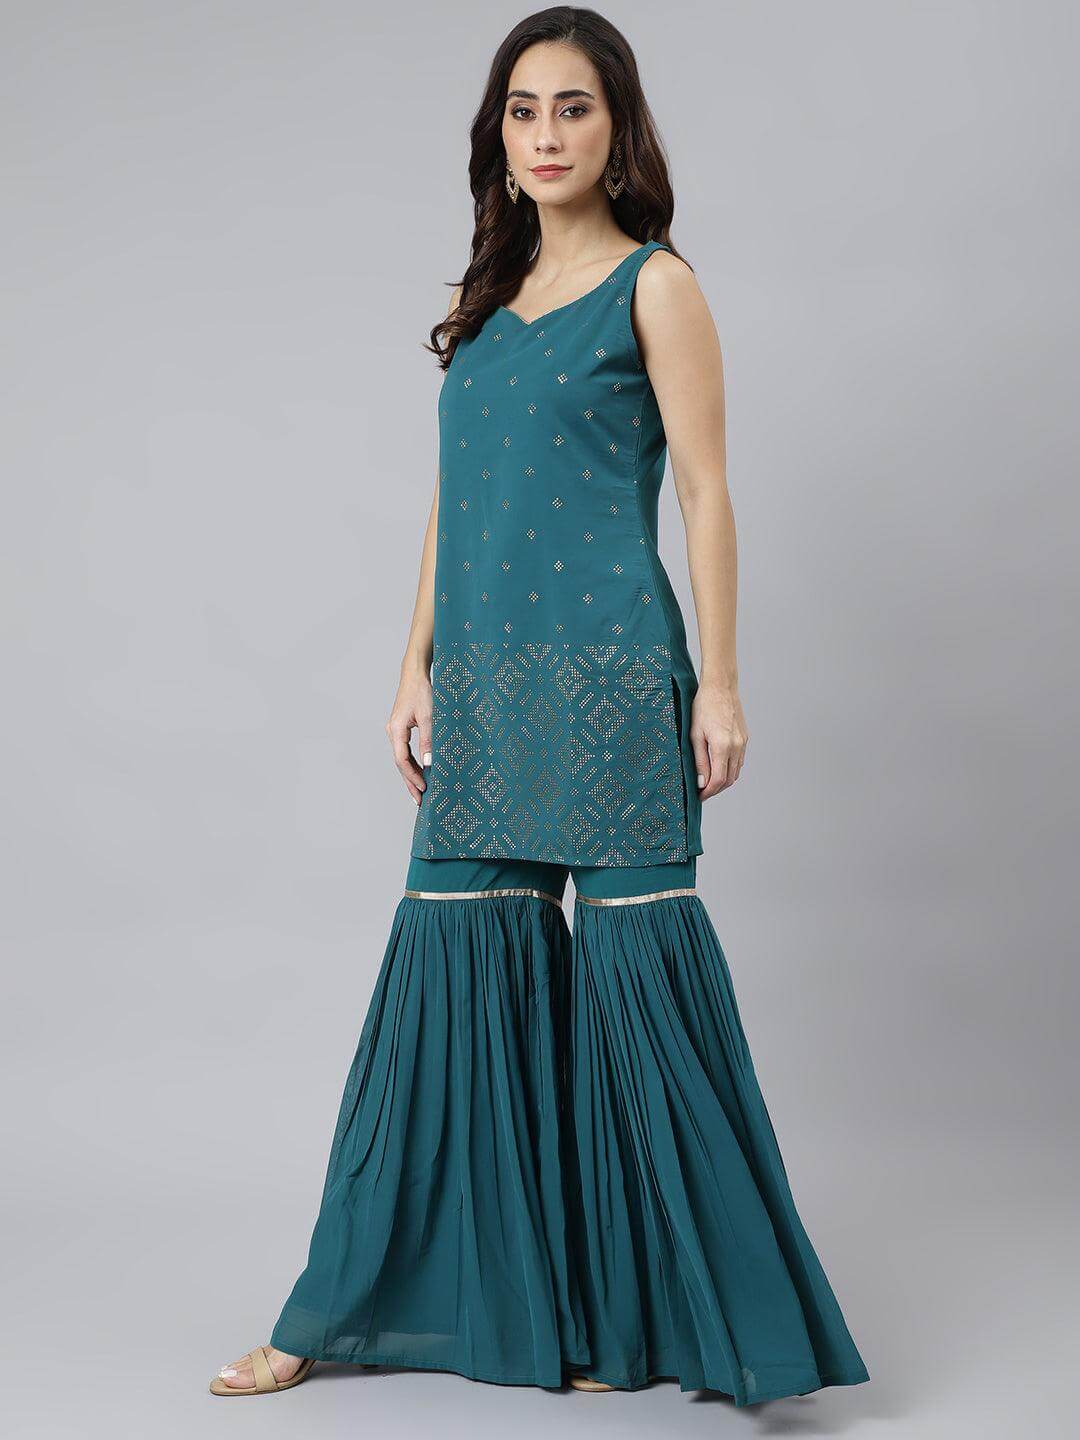 Teal Georgette Embossed Gold Print Top with Gharara and Dupatta